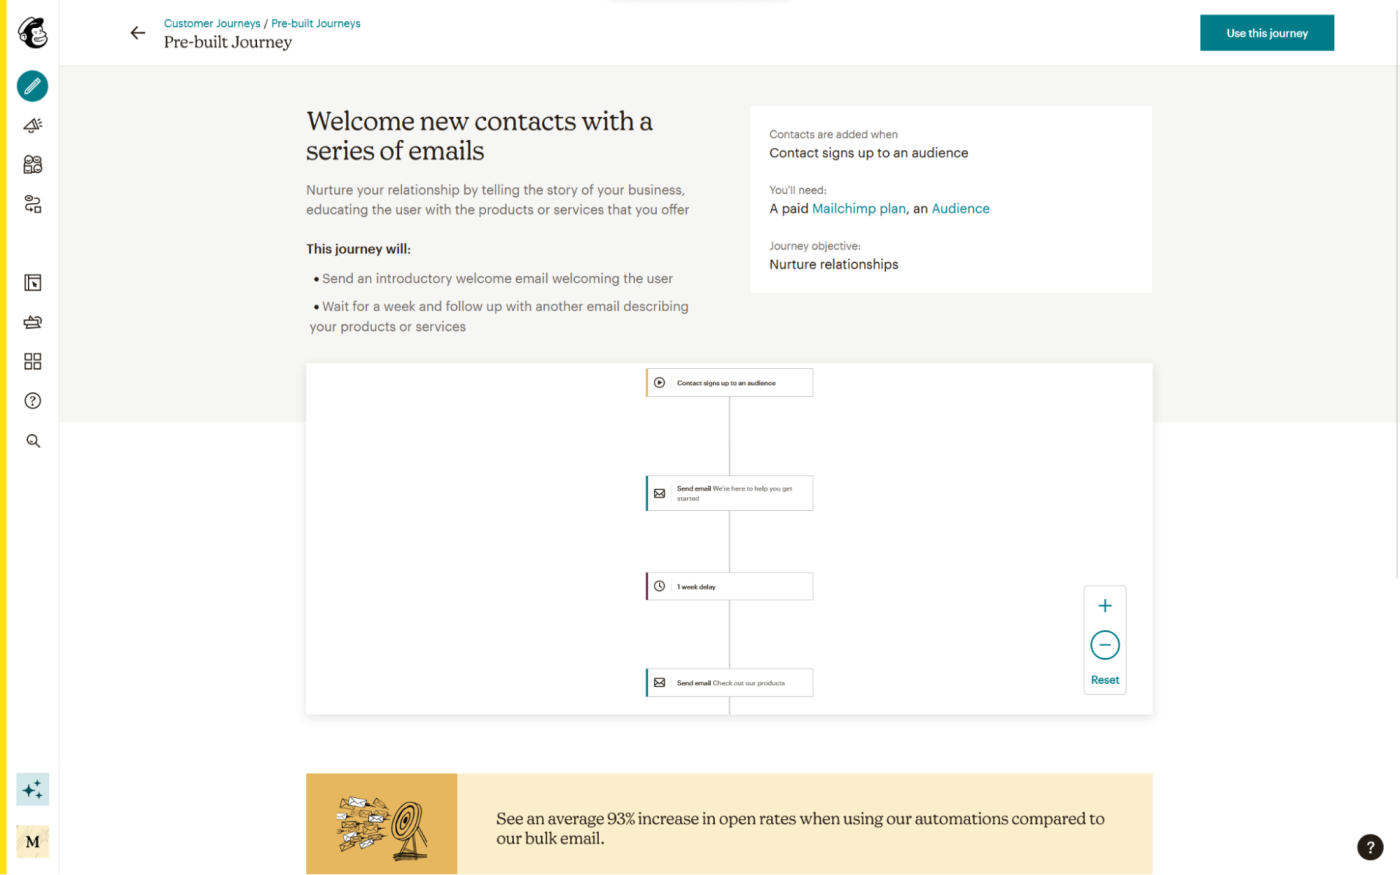 Mailchimp, our pick for the best drip email campaign software for automation templates